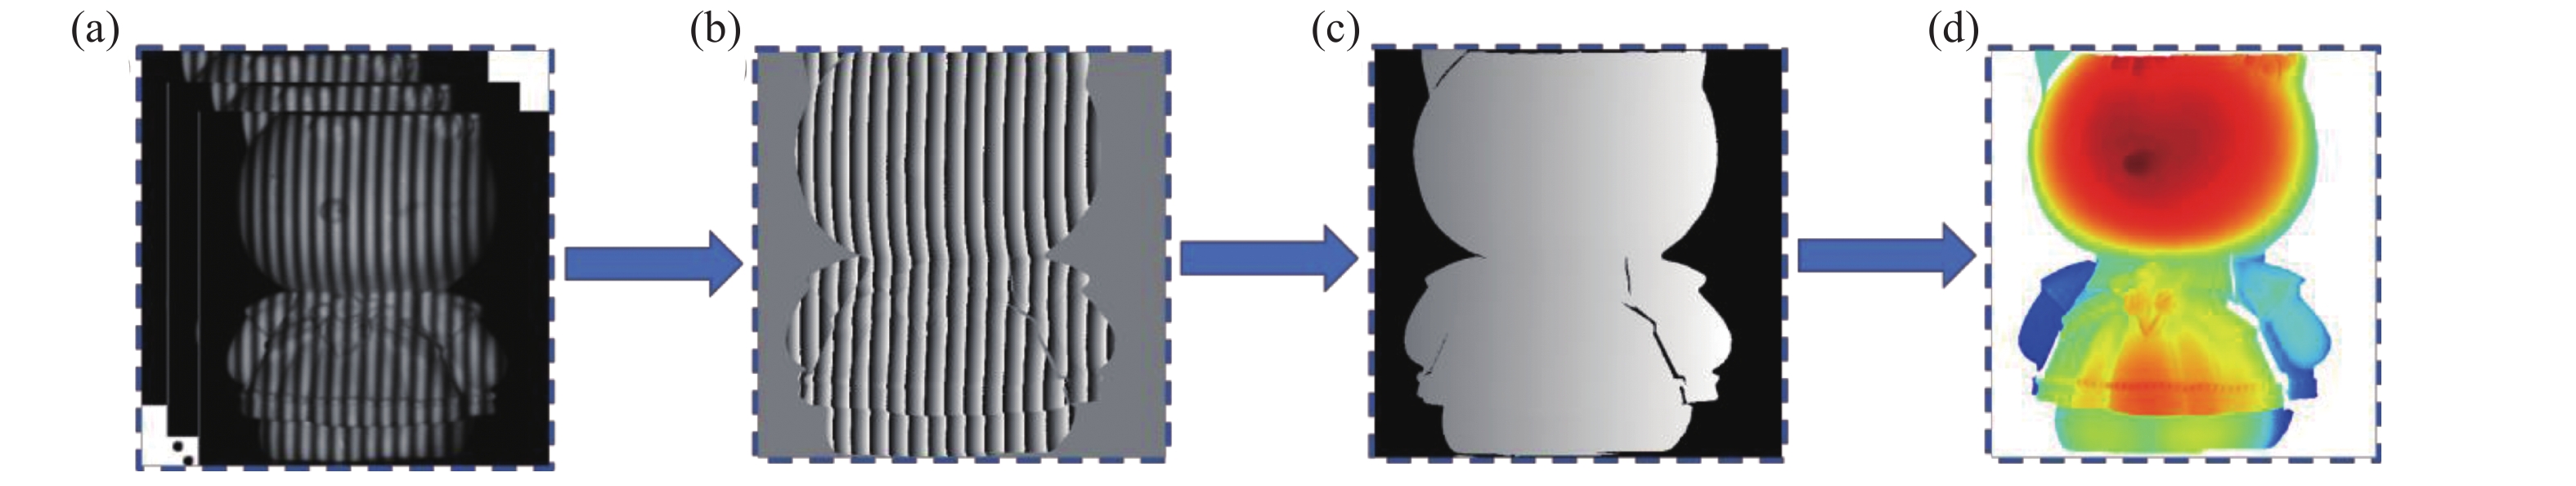 3D measurement of traditional digital fringe projection. (a) Fringe projection; (b) wrapped phase; (c) absolute phase; (d) depth